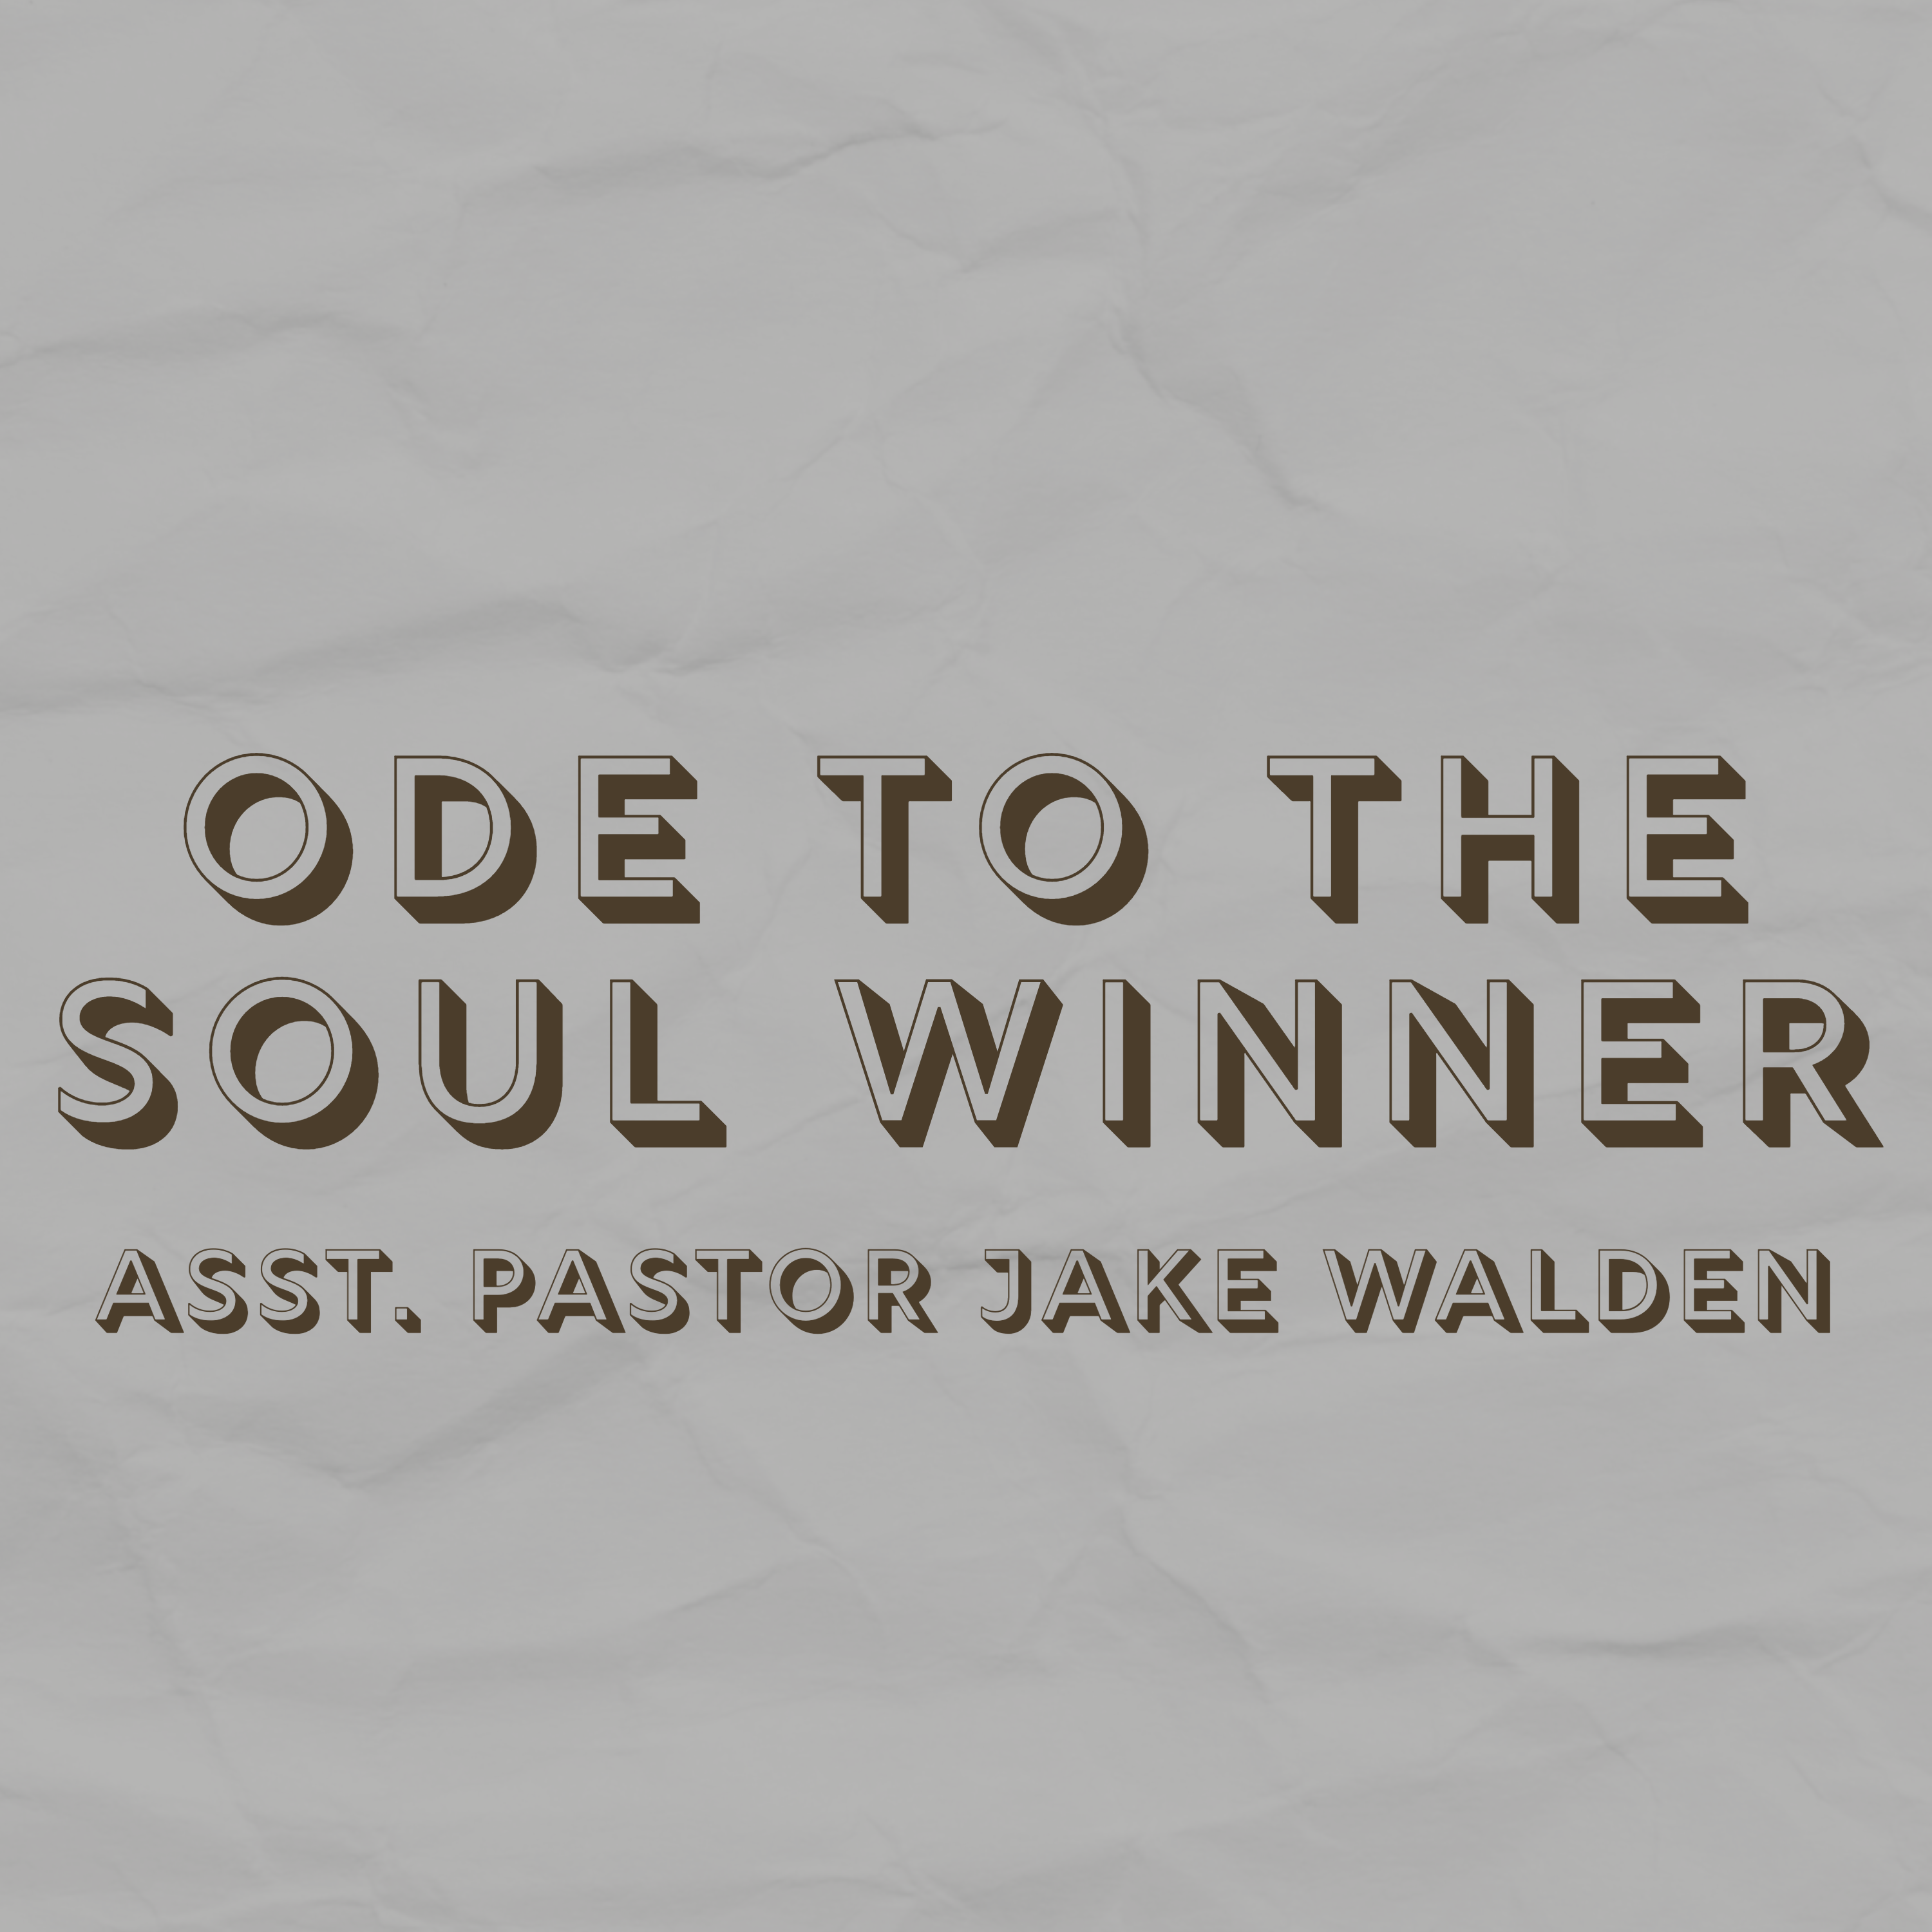 Ode to the Soul Winner